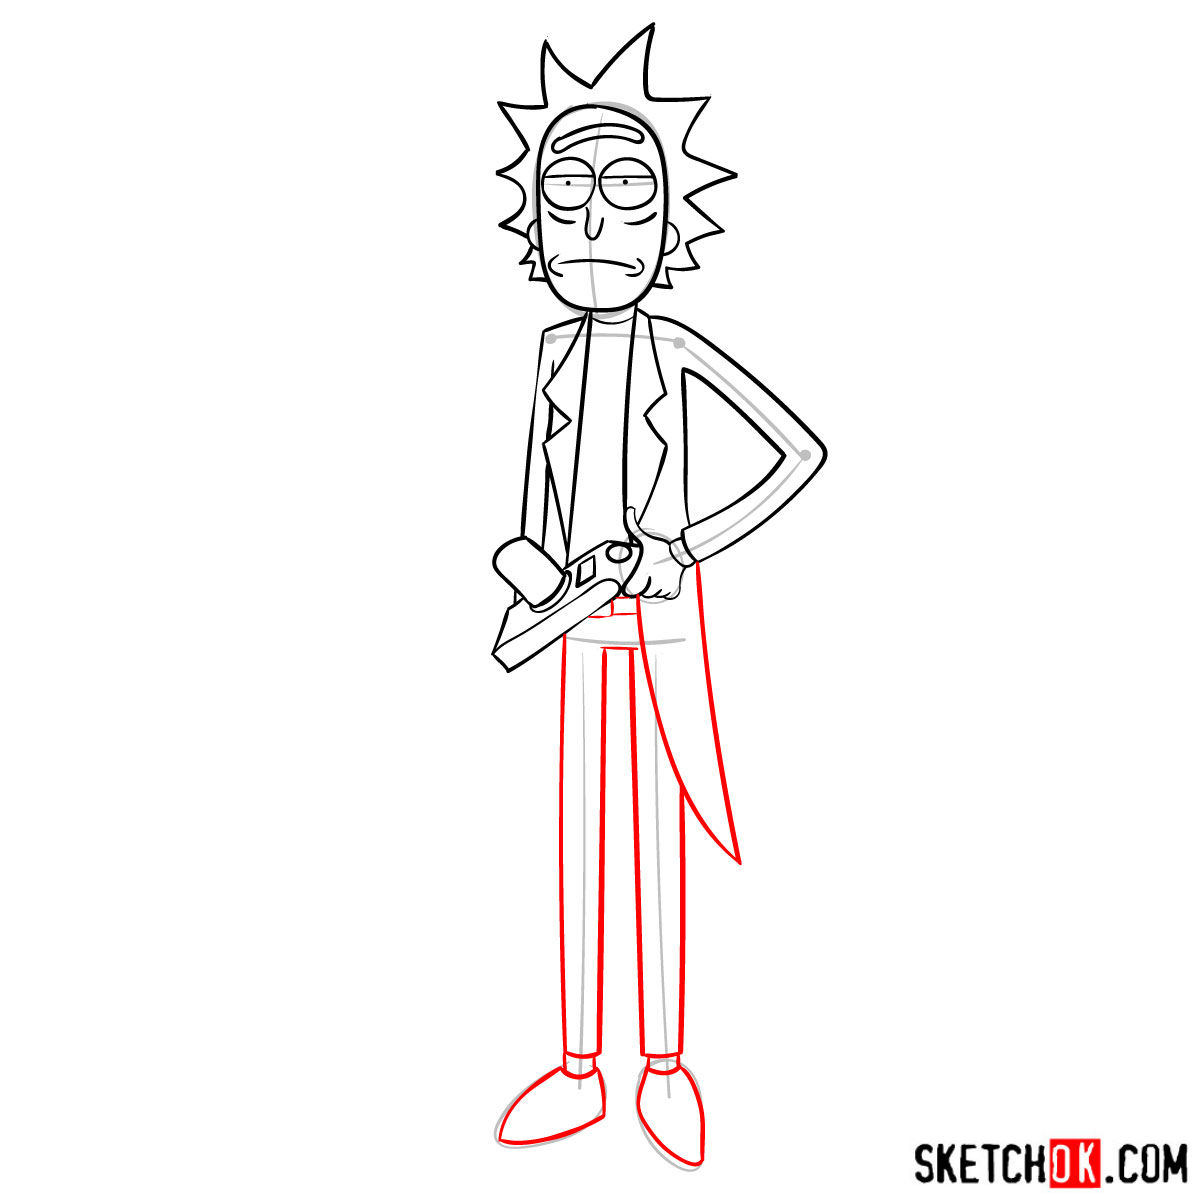 How to draw Rick Sanchez (Rick and Morty) - step 10